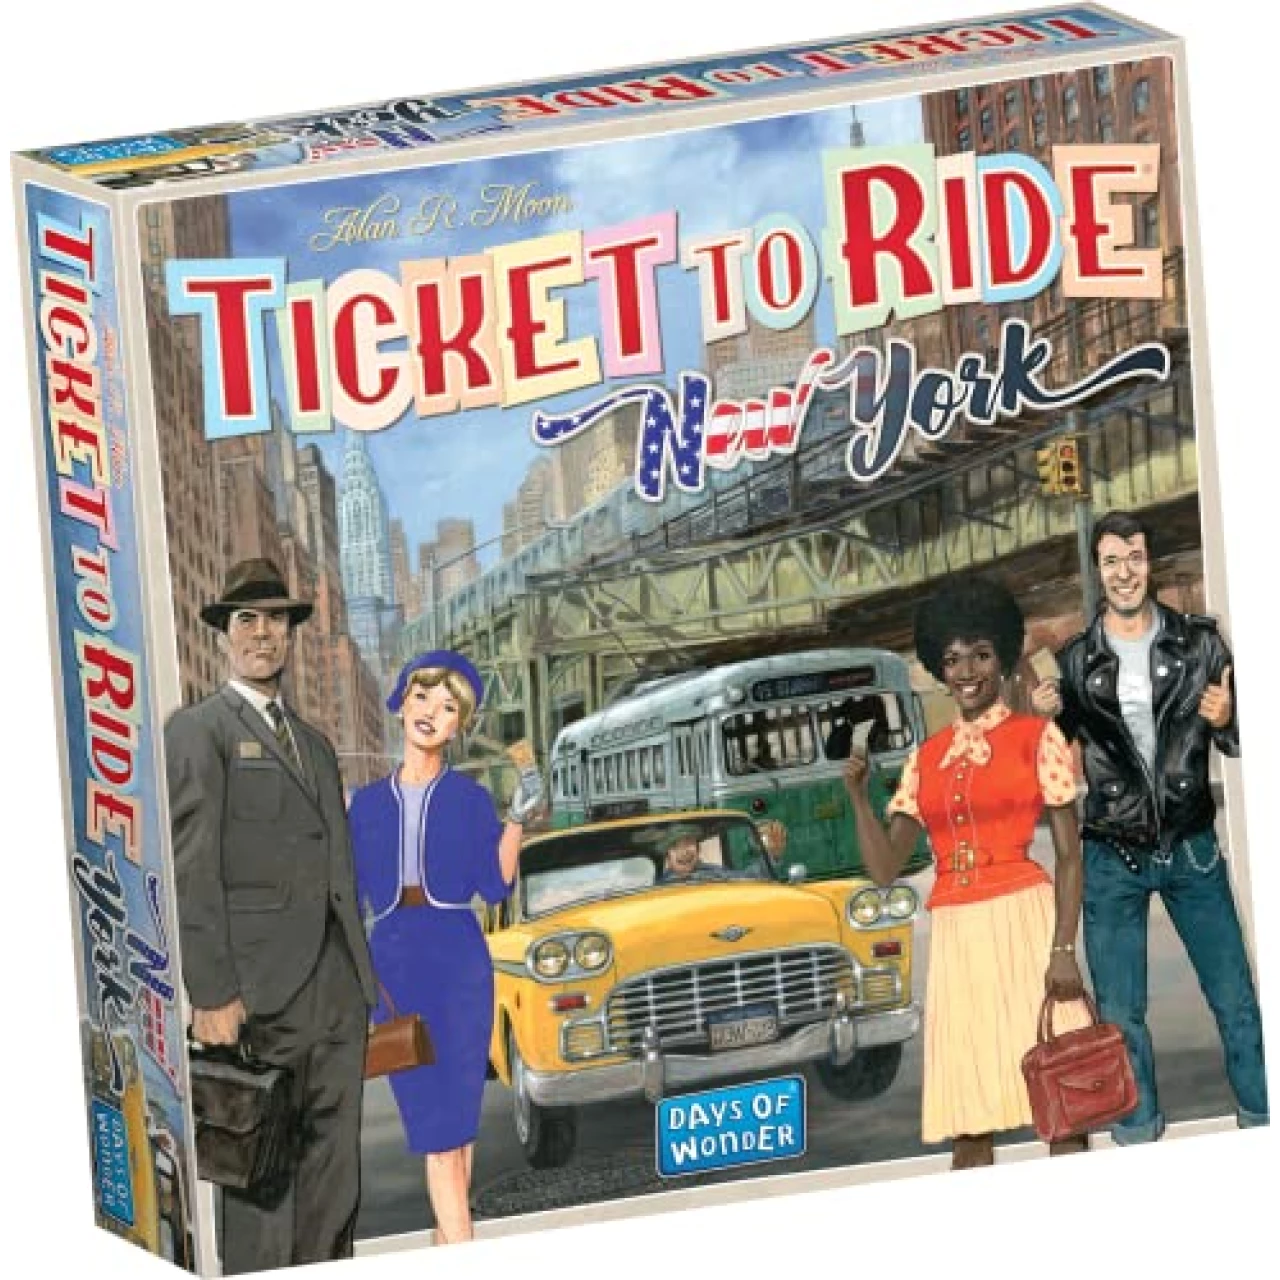 Ticket to Ride New York Board Game | Train Route-Building Strategy Game | Fun Family Game for Kids and Adults | Ages 8+ | 2-4 Players | Average Playtime 10-15 Minutes | Made by Days of Wonder